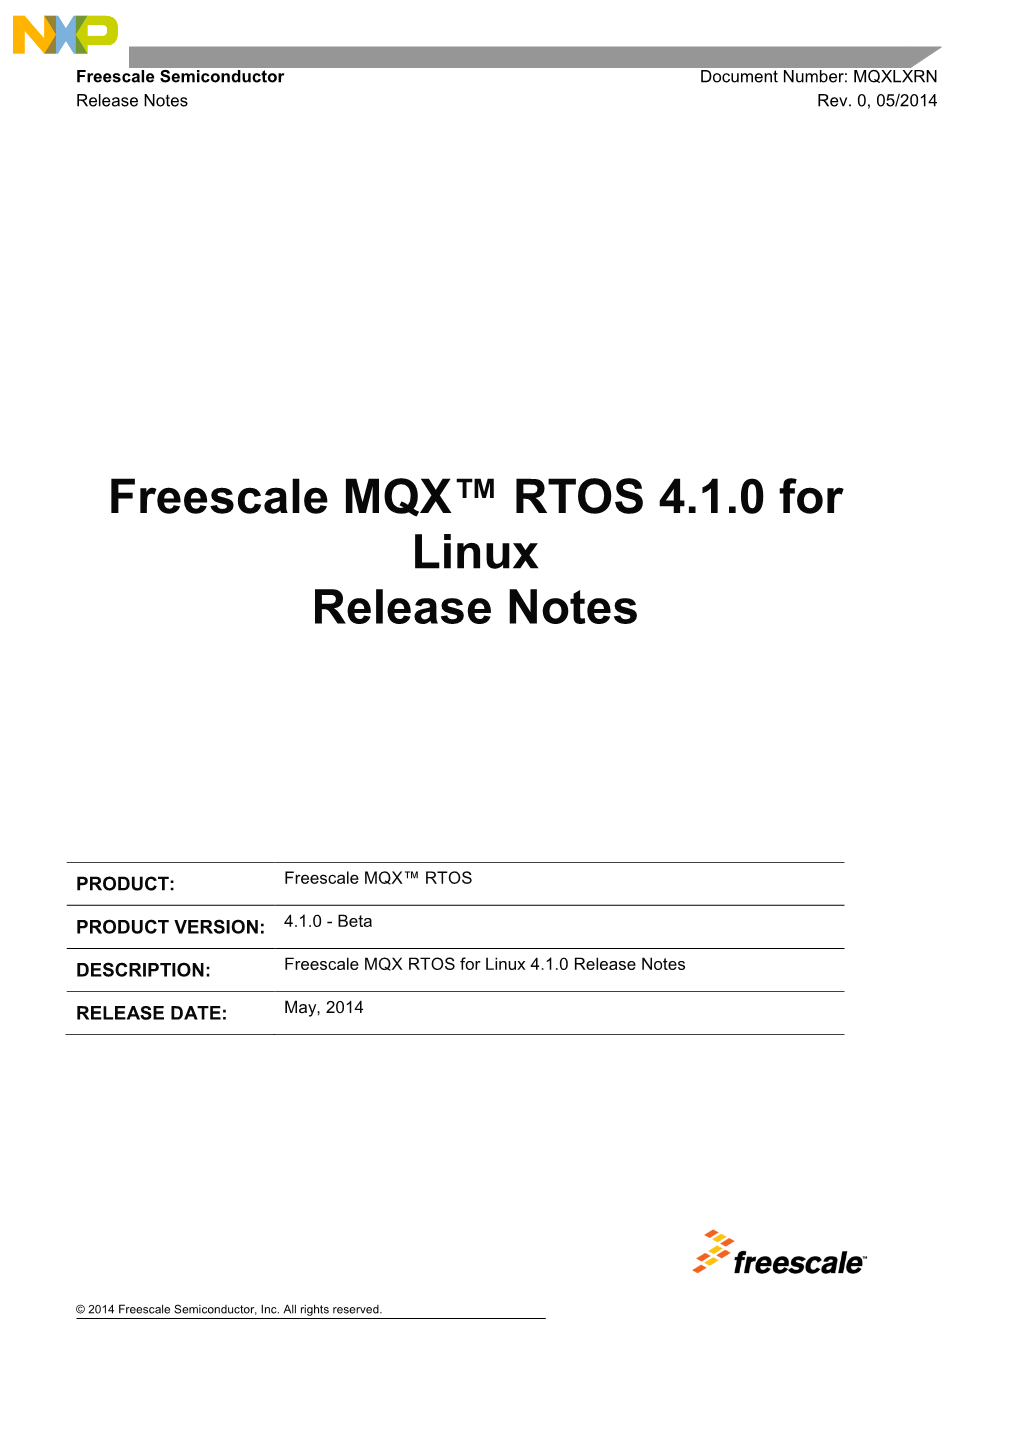 Freescale MQX™ RTOS 4.1.0 for Linux Release Notes